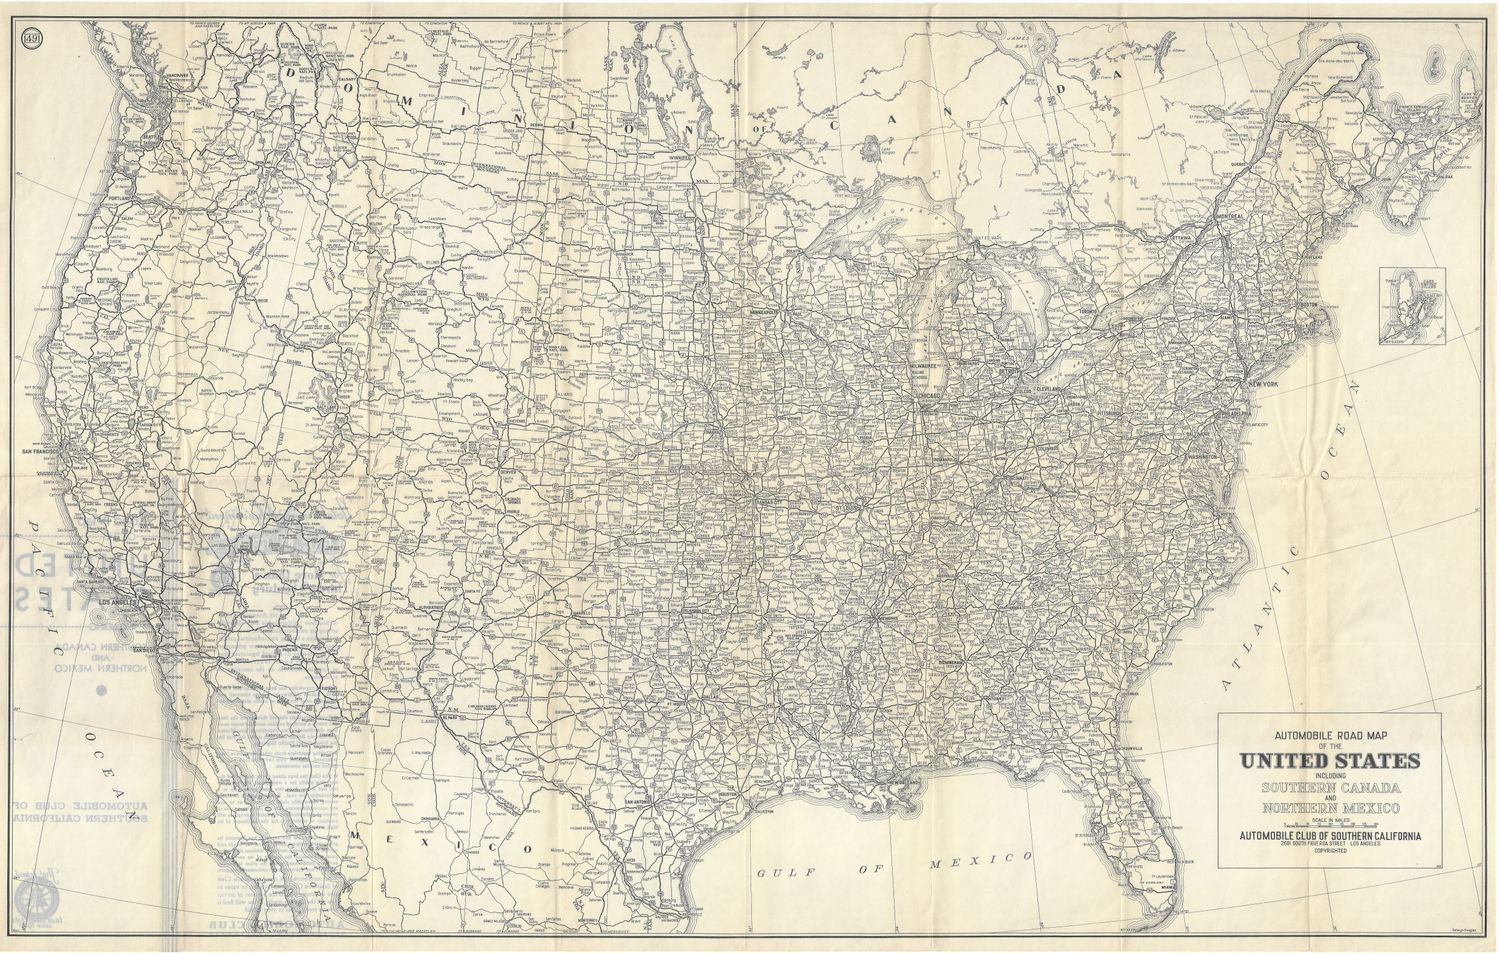 1930 Road Map of the United States by ACSC